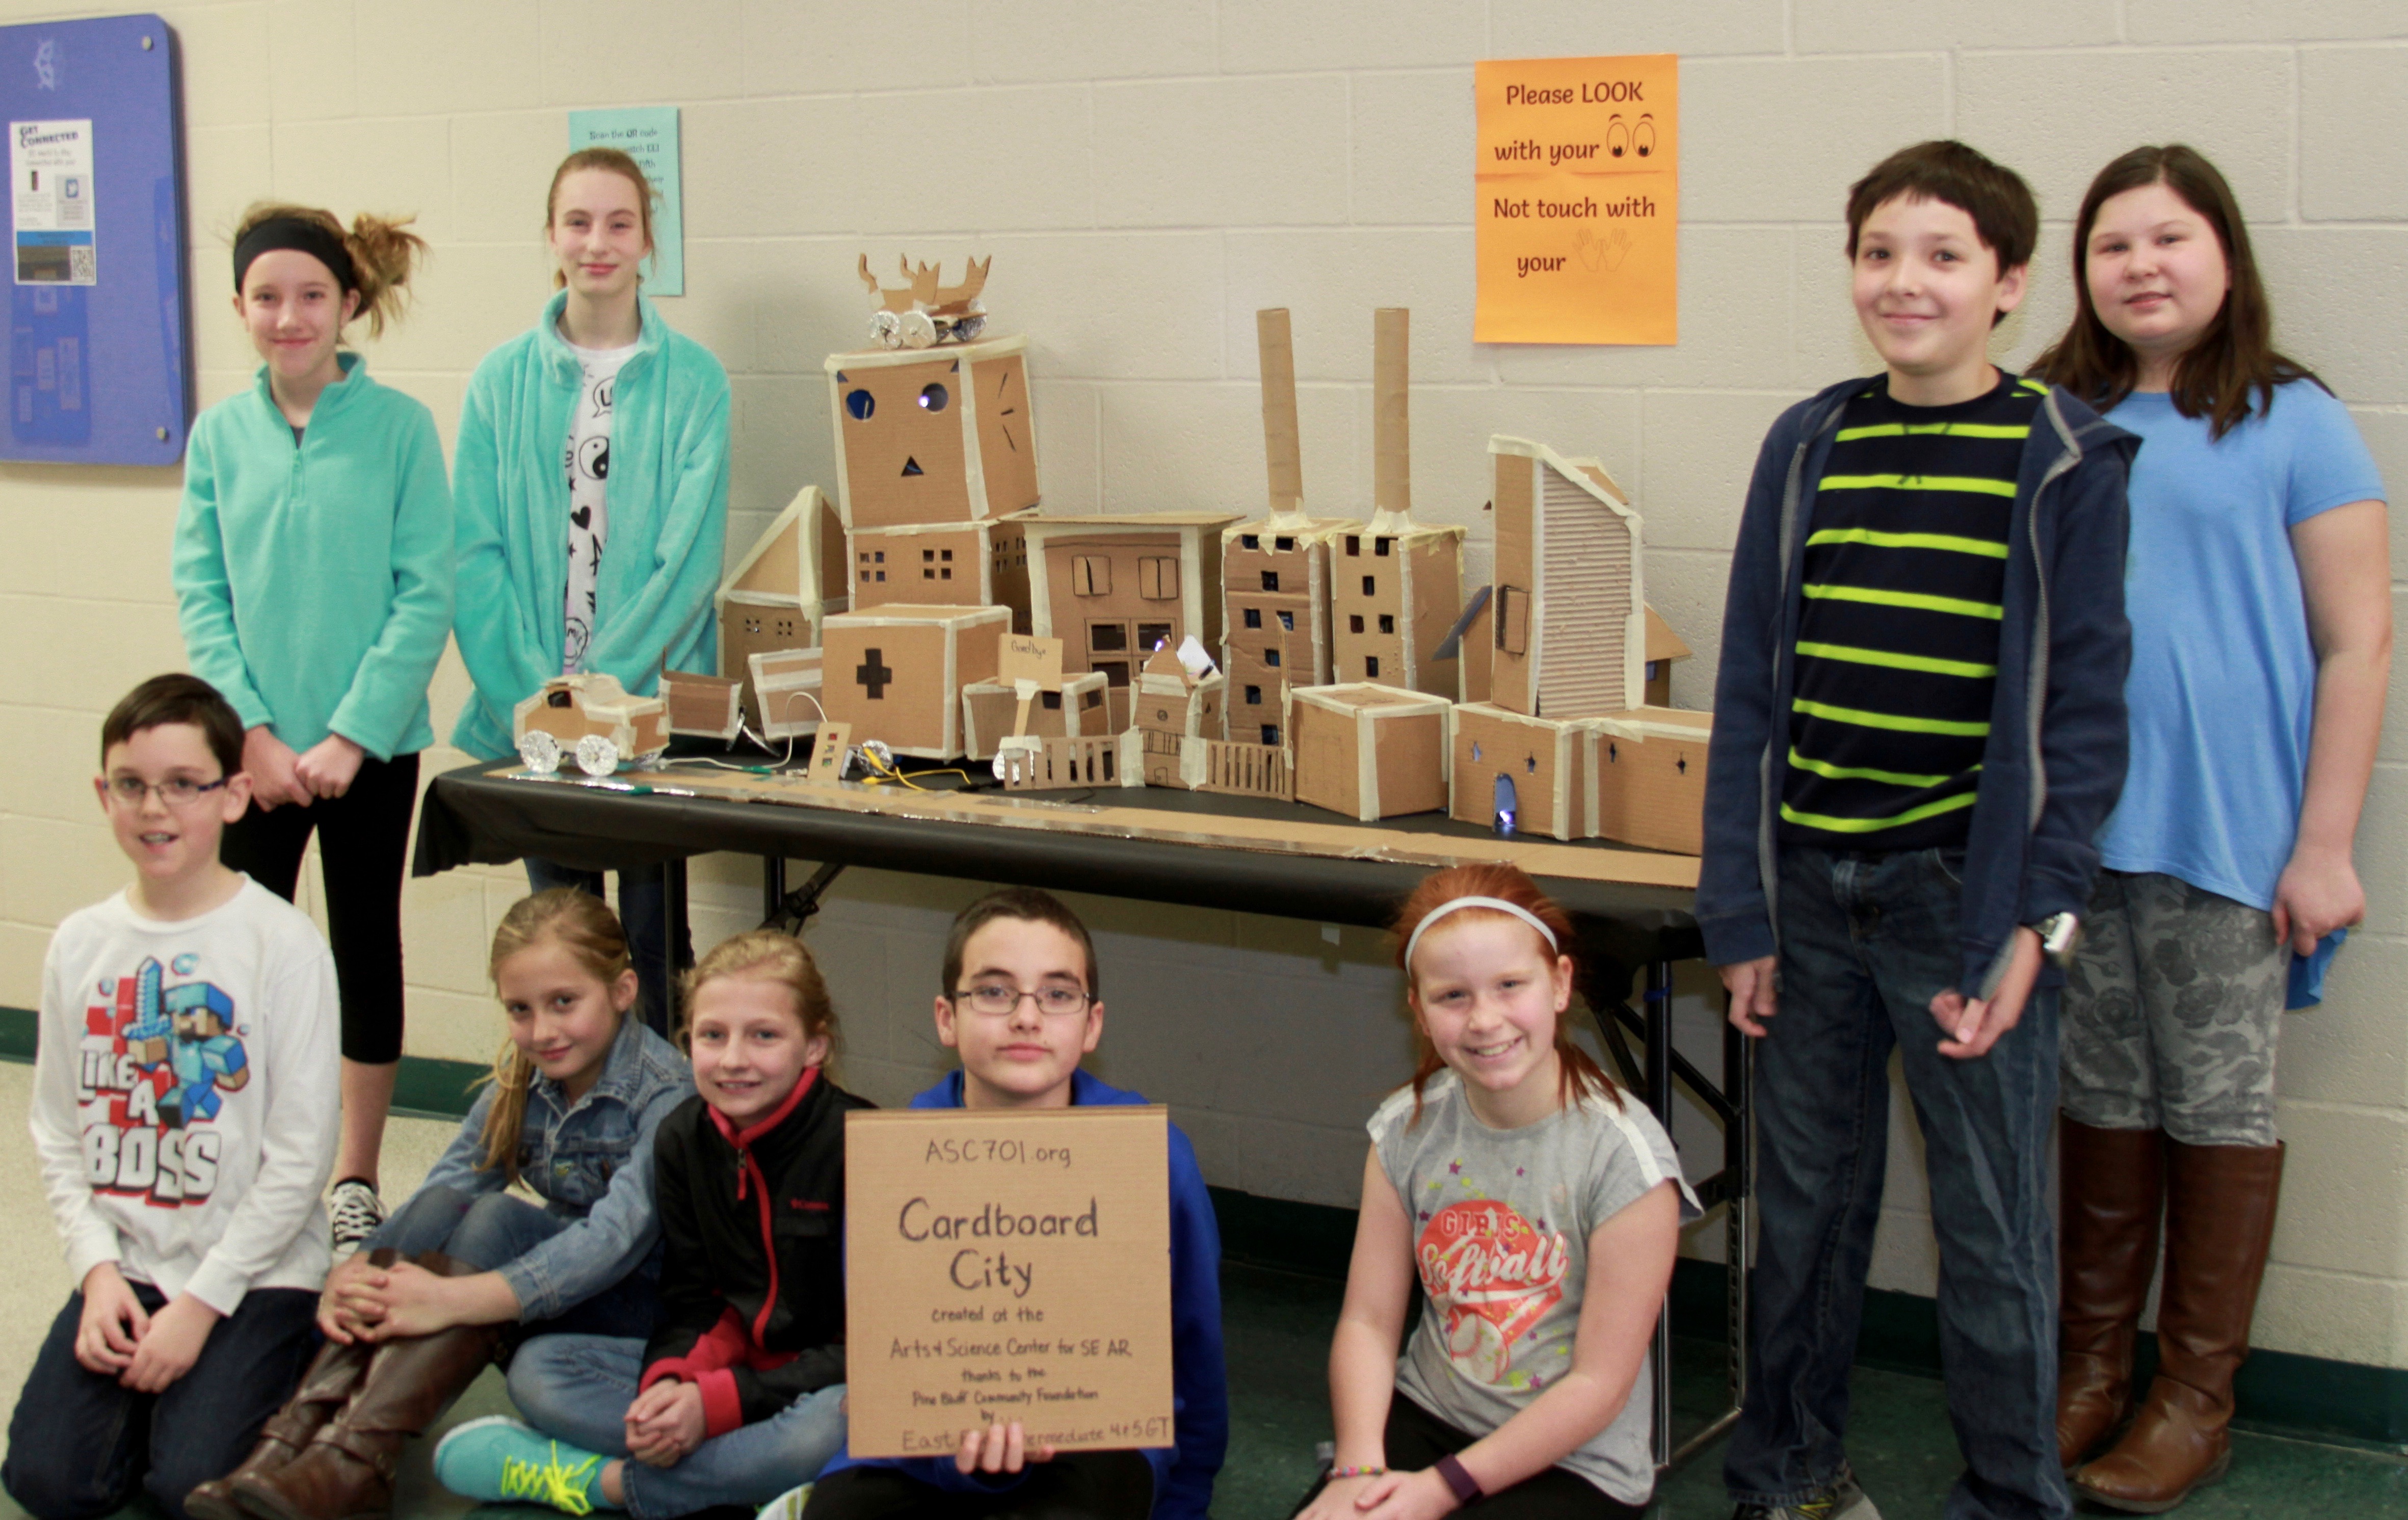 Students pose next to cardboard city